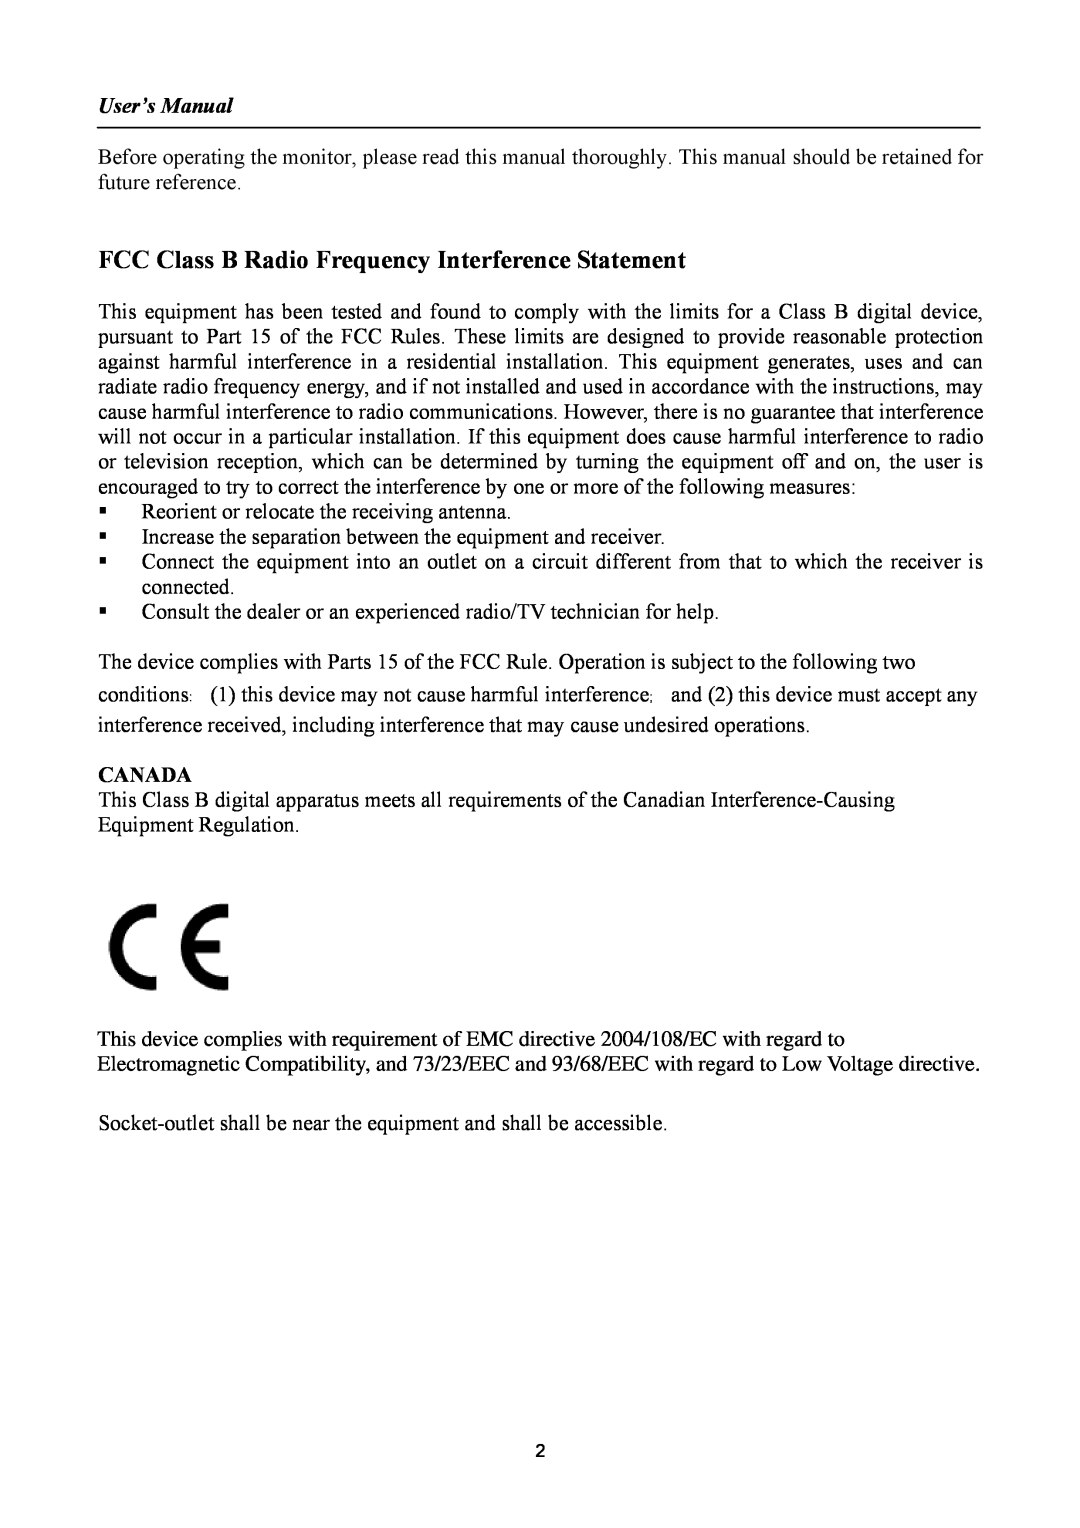 Hanns.G HG221A, HSG1061 manual FCC Class B Radio Frequency Interference Statement, User’s Manual, Canada 